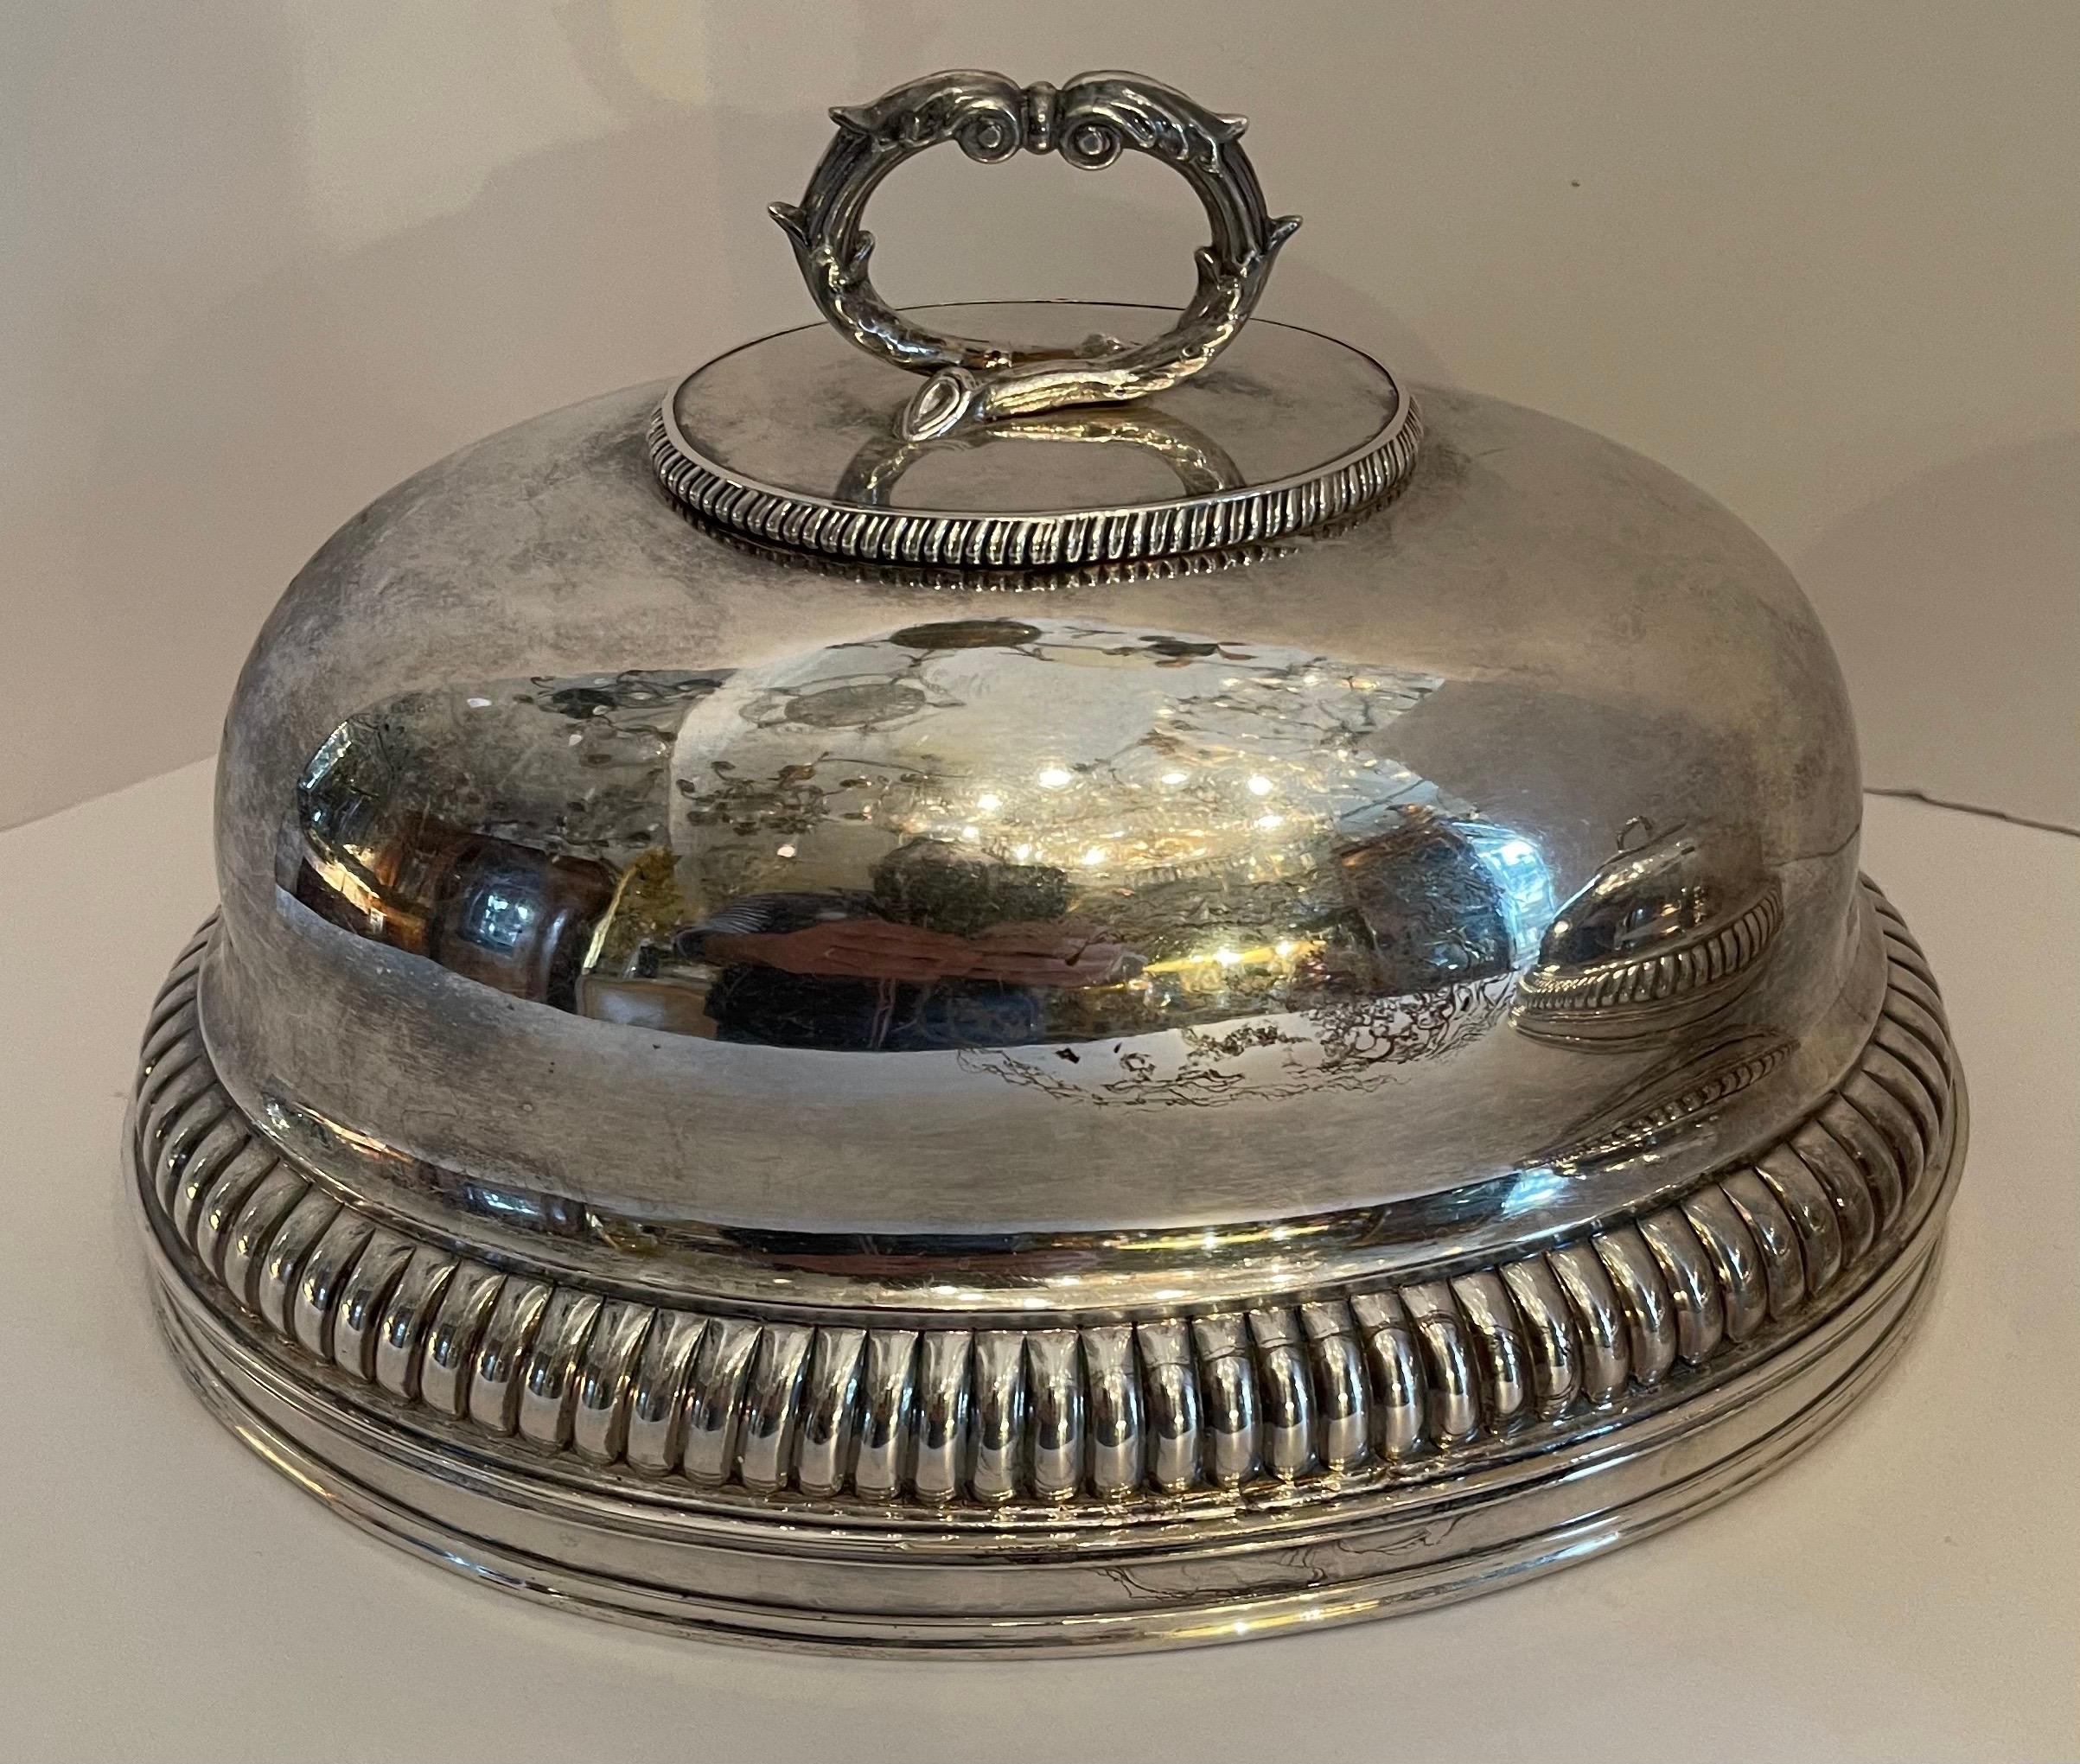 A fine English silver plated pair of meat, food dome cover Sheffield serving cloche.